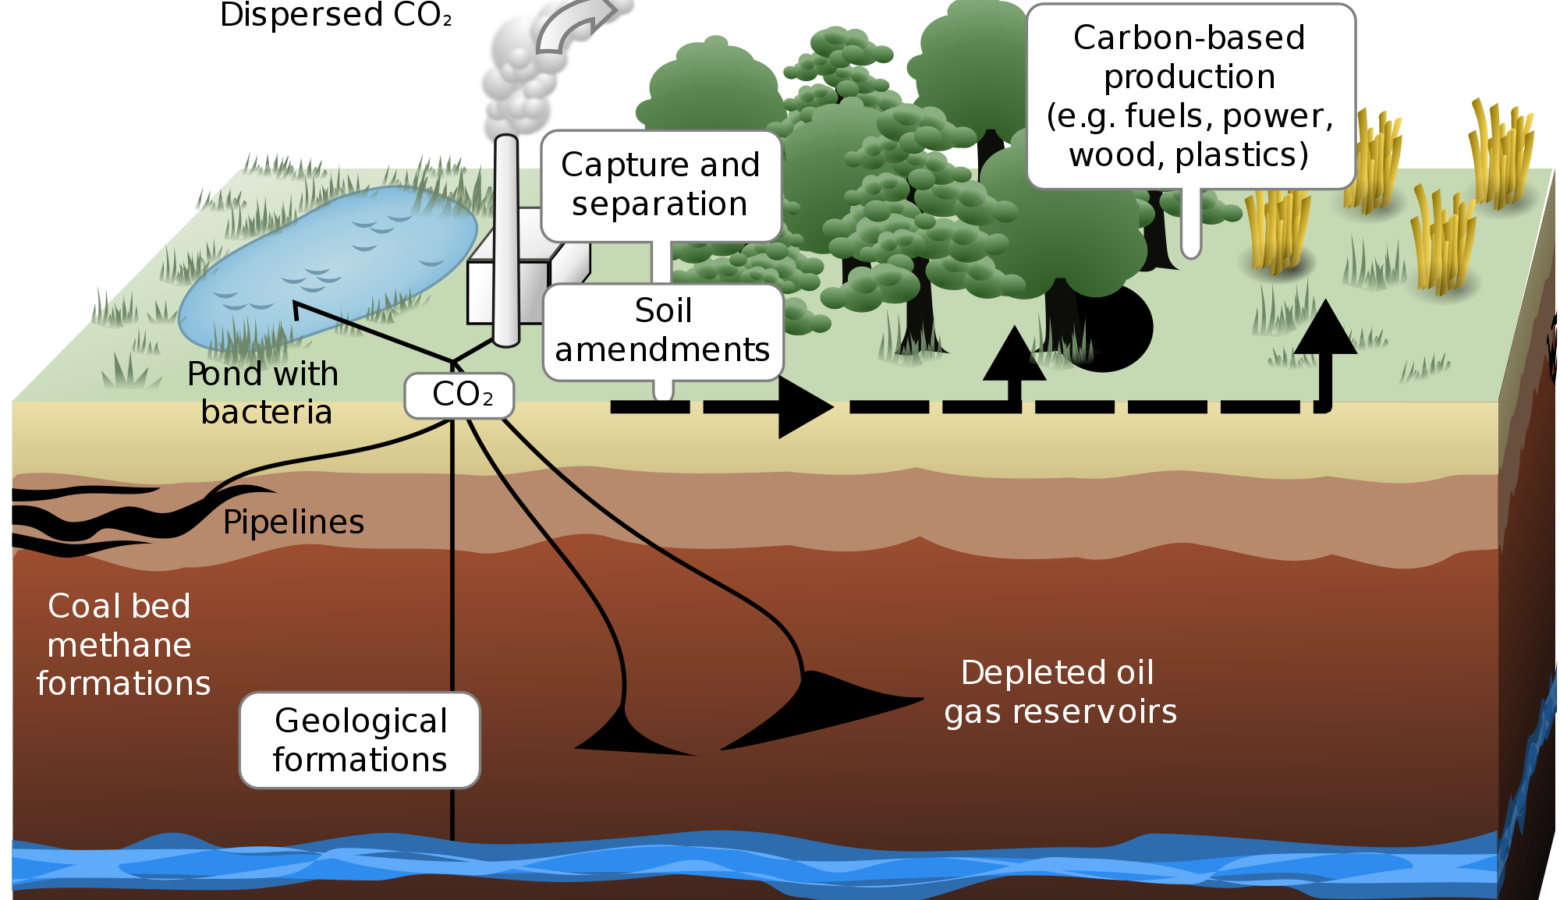 Ways carbon dioxide can be sequestered on land and underground. (LeJean Hardin and Jamie Payne/Wikimedia Commons)